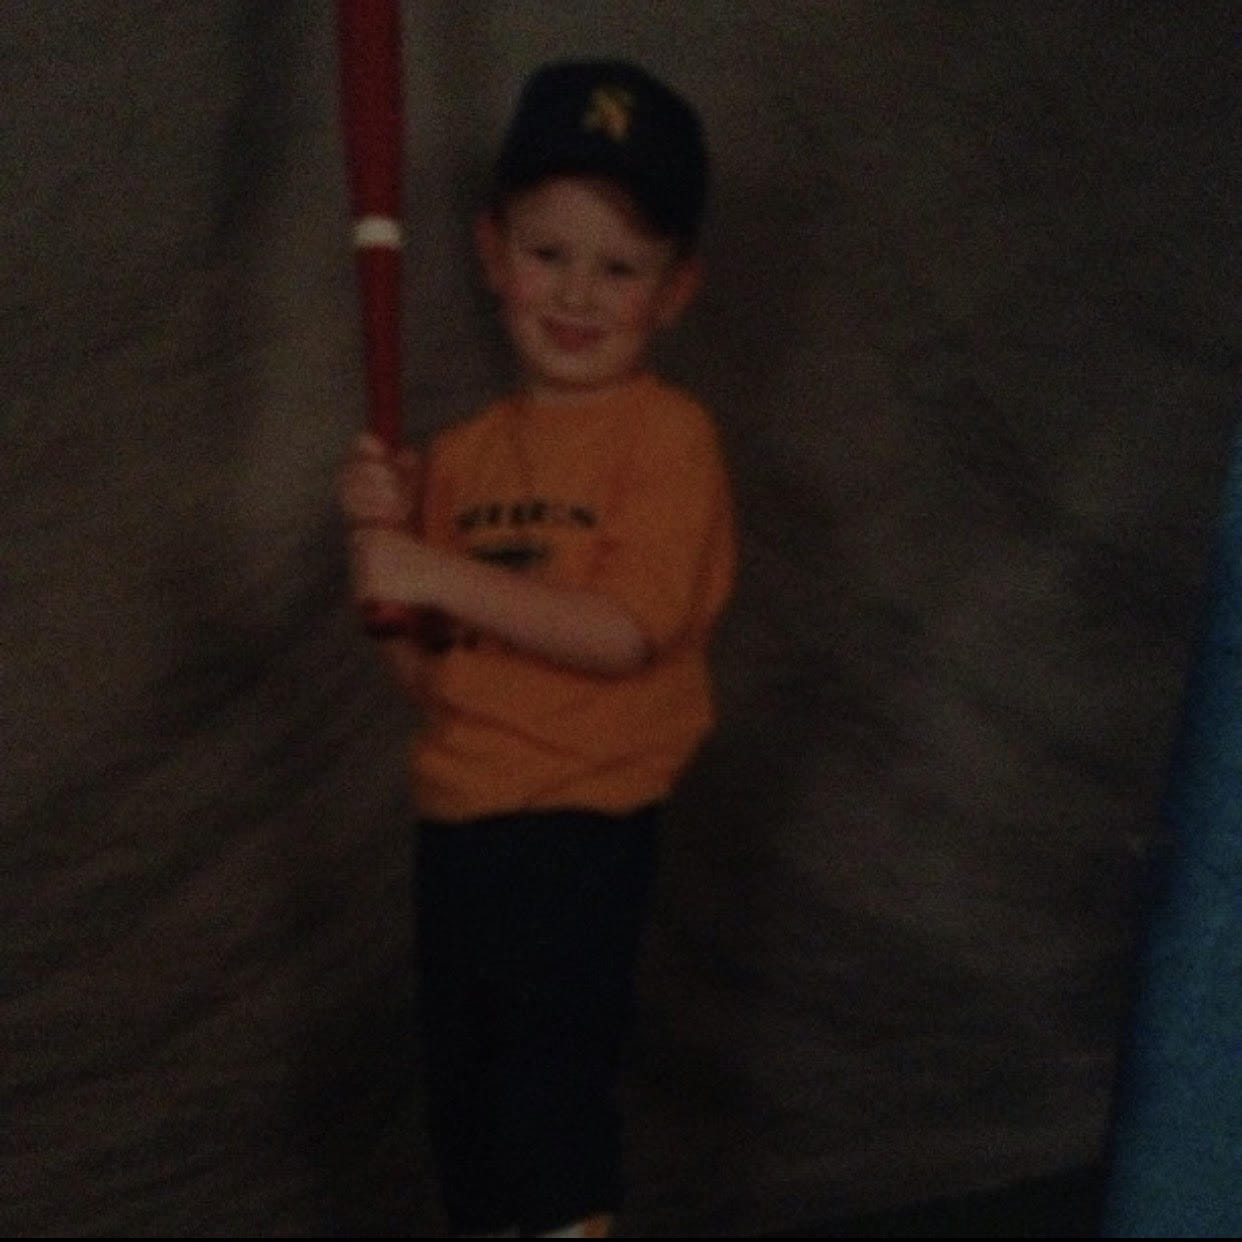 A picture from 2003 showing me, Justice, as a six-year-old holding a baseball bat.